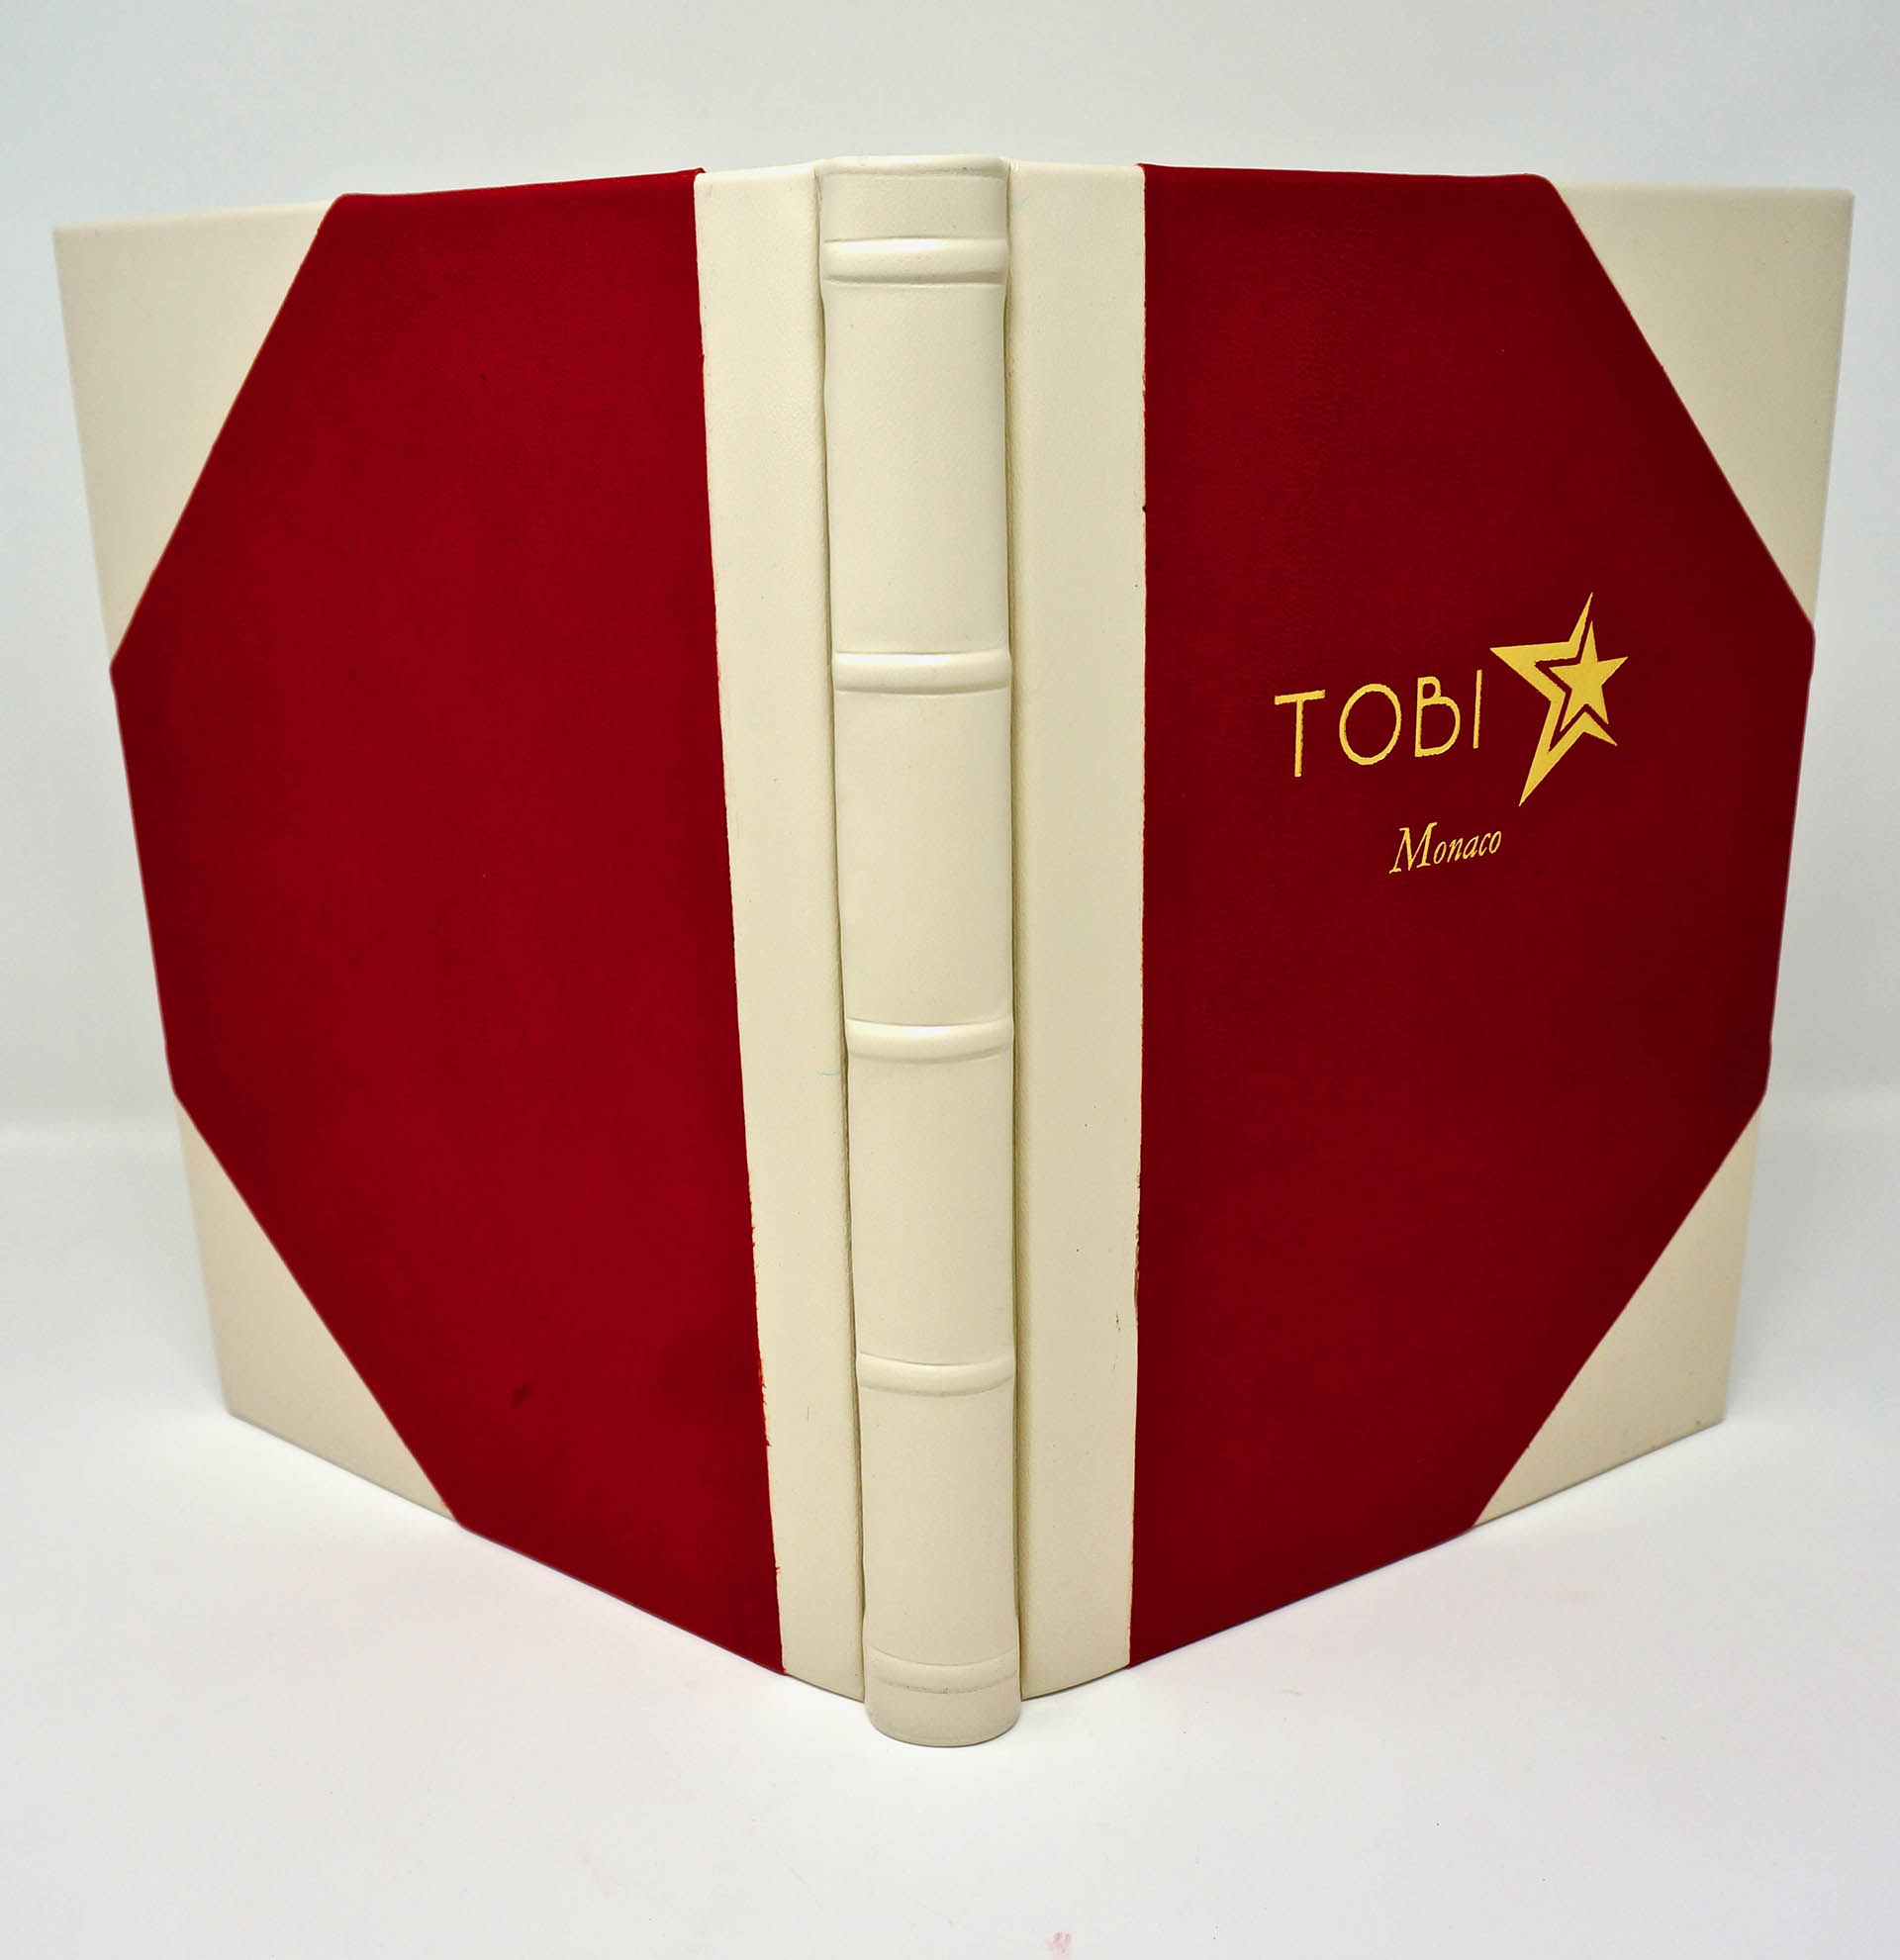 Boston Harbor Bookbindery
www.bostonharborbooks.com

Monaco Sailing Journal; Custom red/white leather book, designed and executed for the client’s yacht adventures.